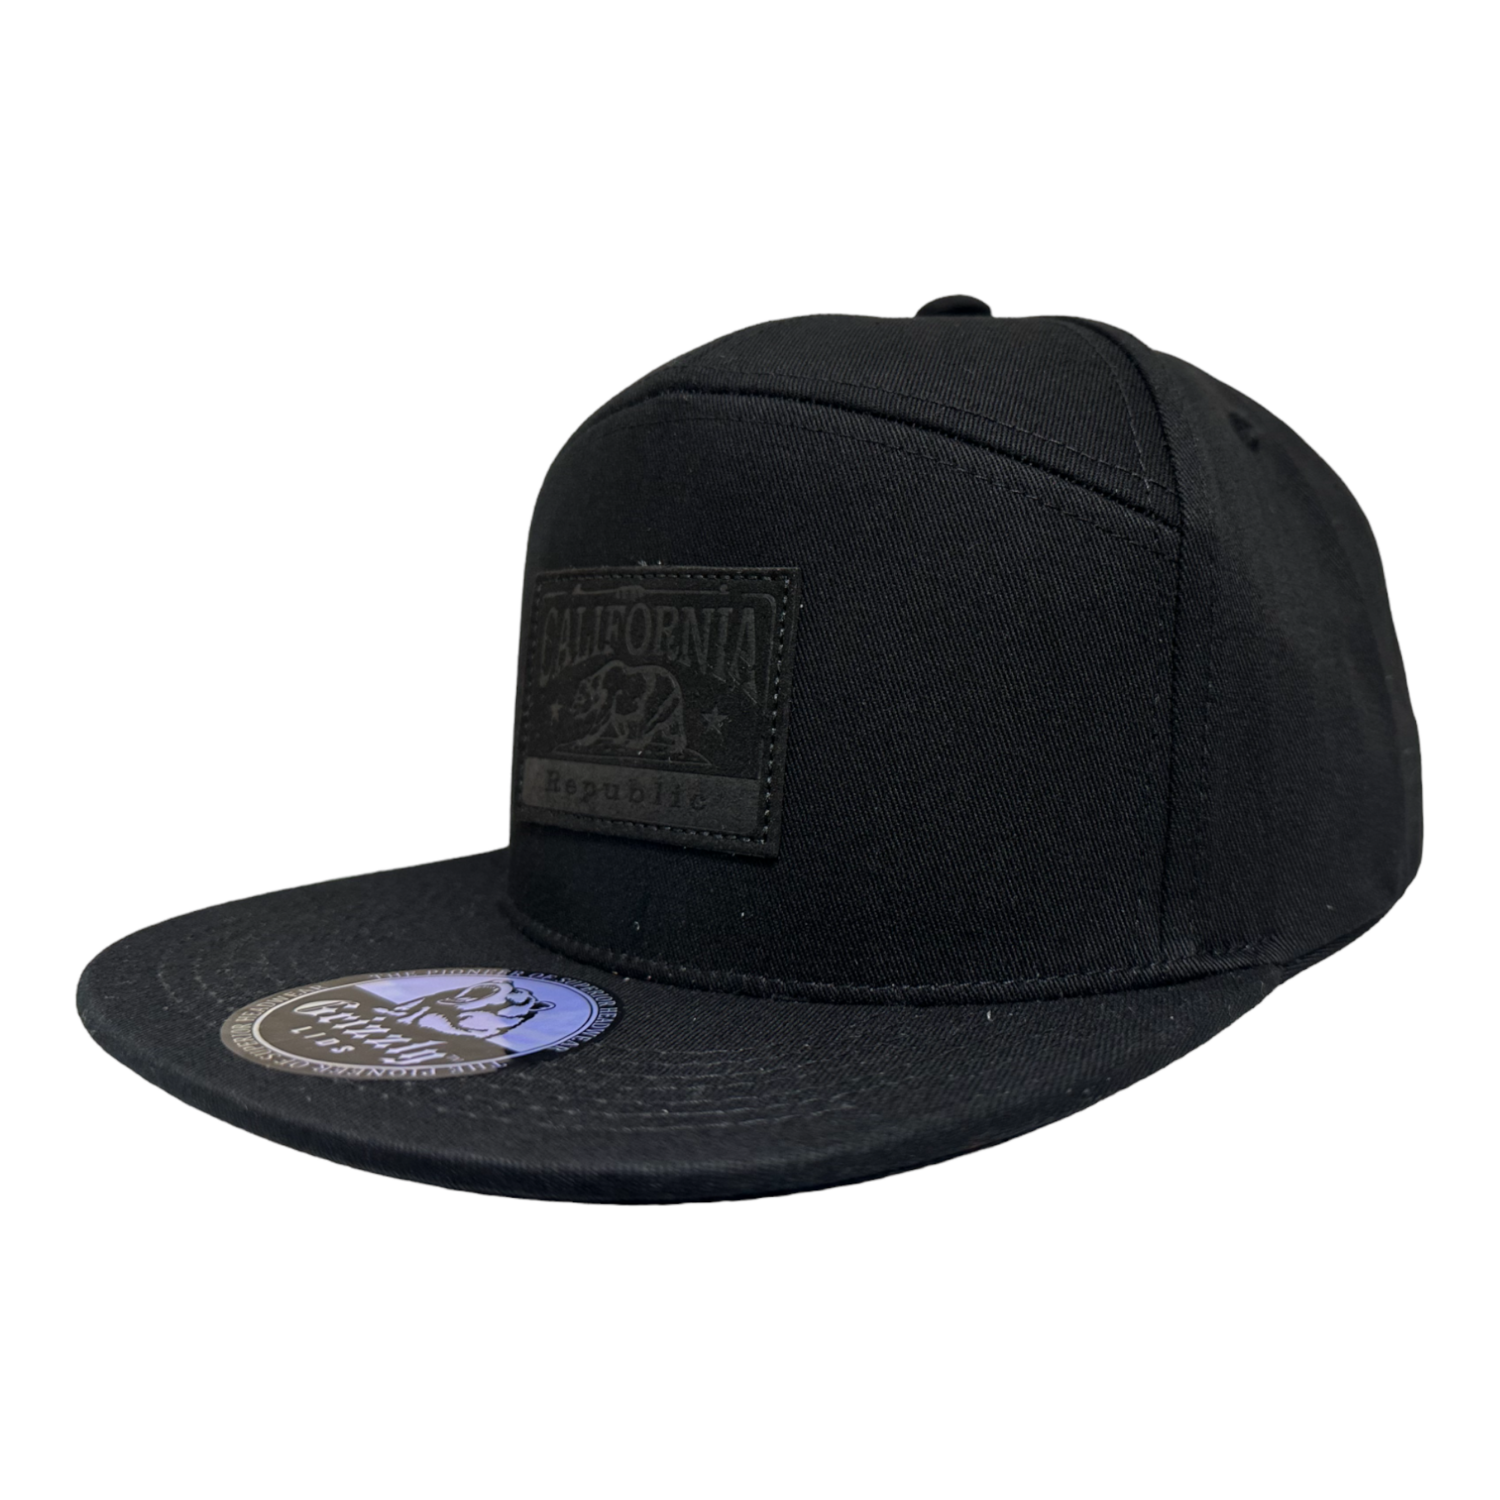 California Republic Black Leather Rectangle Patch Snapback 6 Panel Adjustable Snap Fit Hat